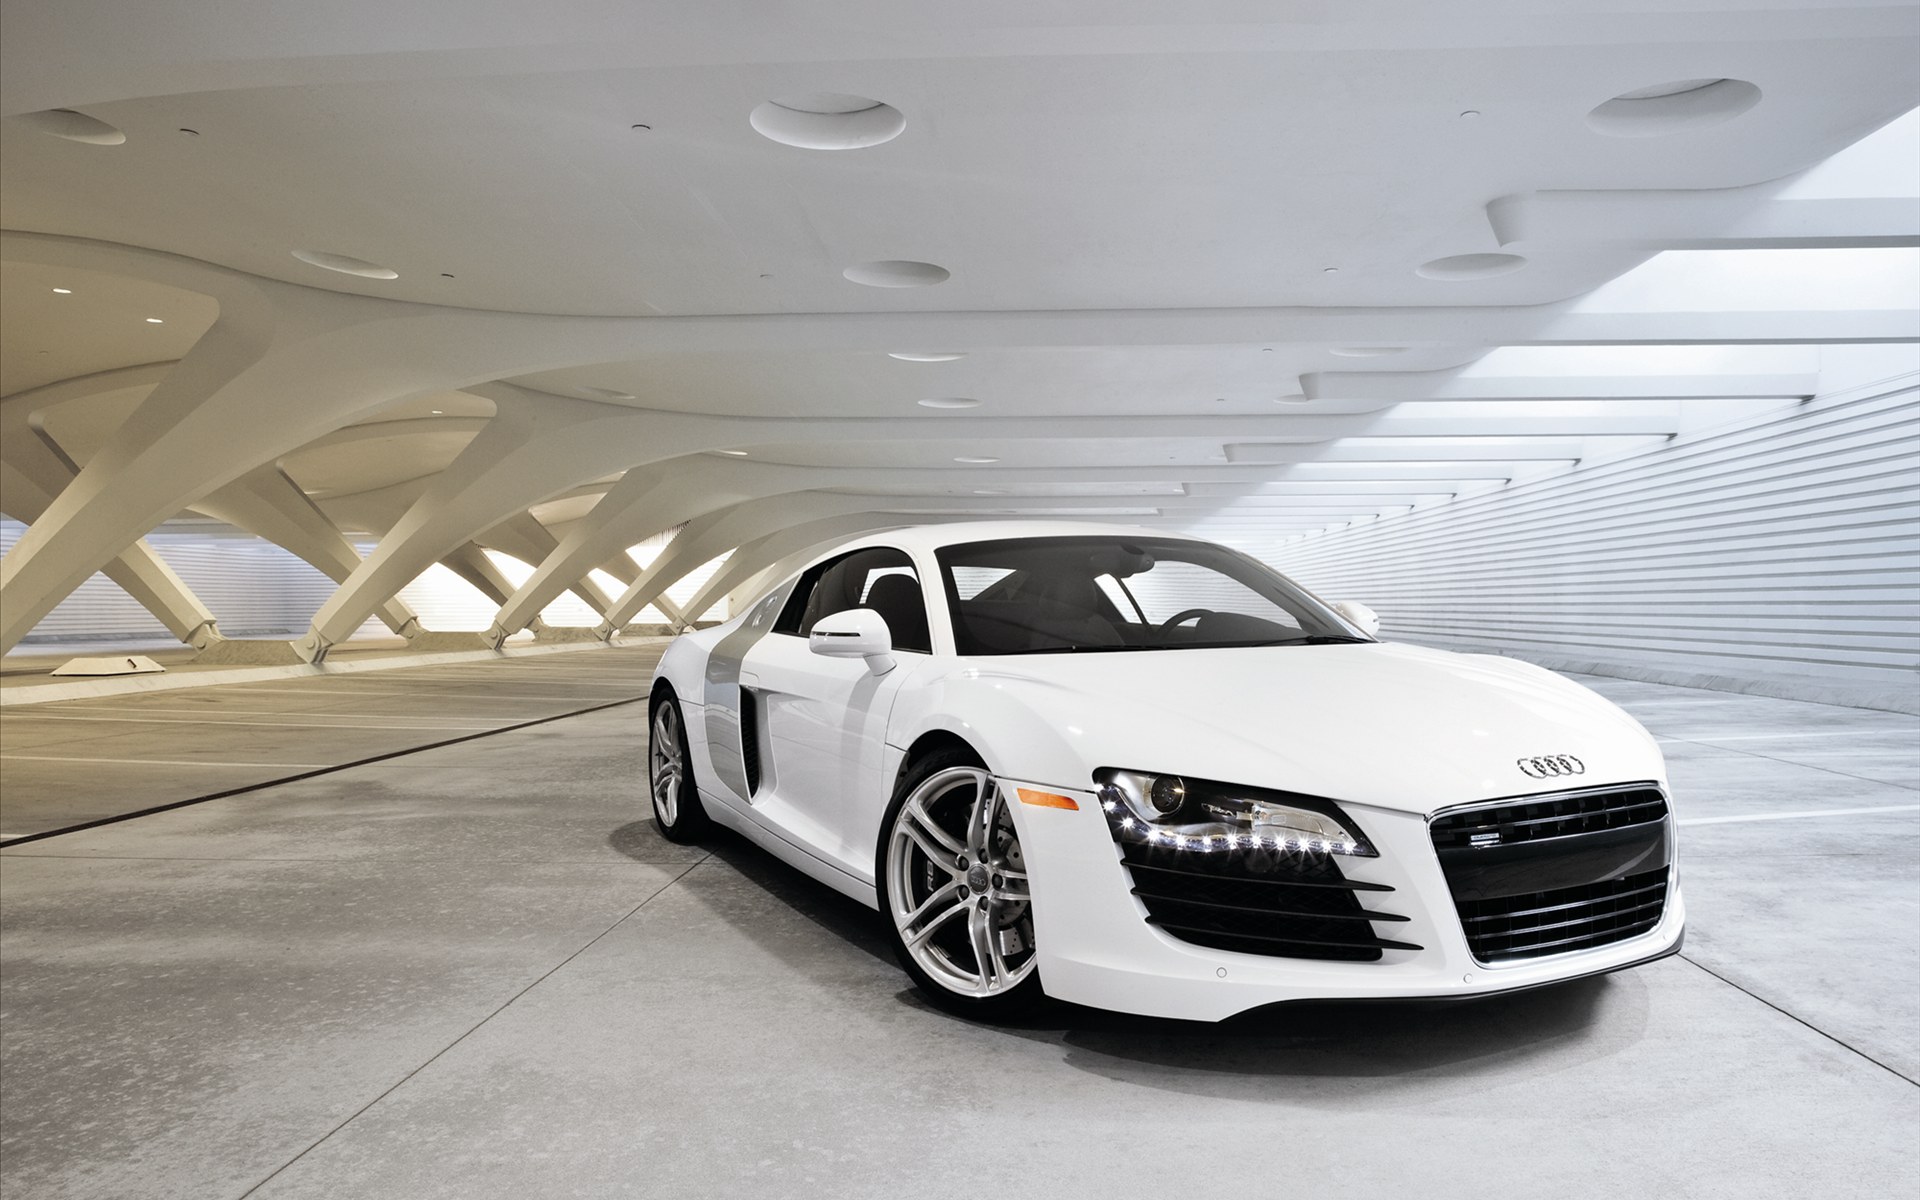 Wallpaper Of The Top Cars A White Sports Car Audi R8